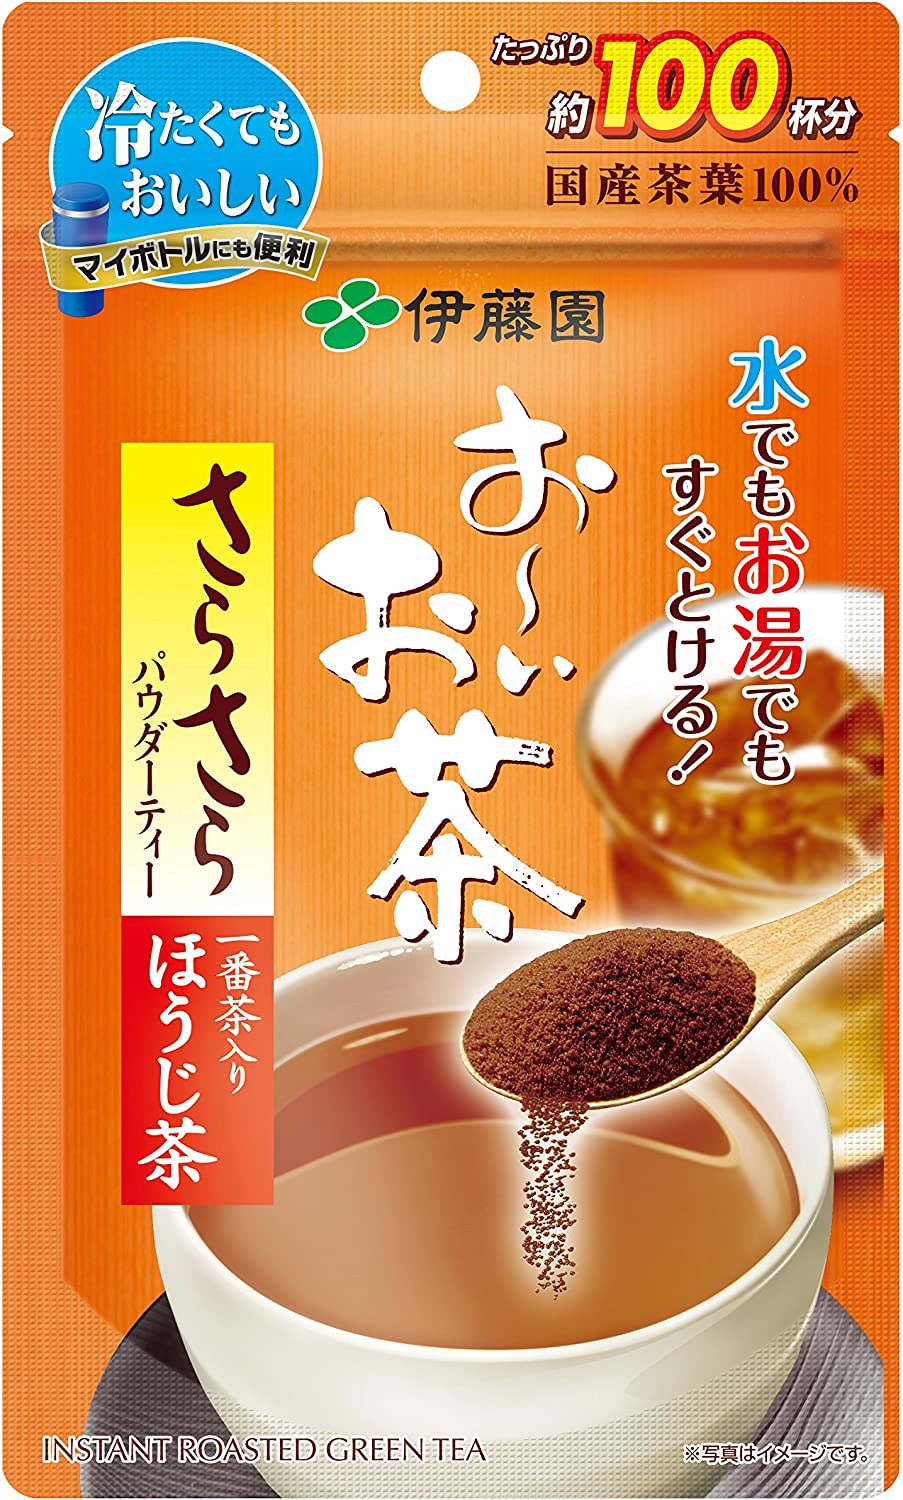 Ito En Instant Hojicha (Roasted Green Tea) with 100% Domestic Tea Leaves for Approximately 100 Cups, Bag Type with Zipper, 80g - NihonMura